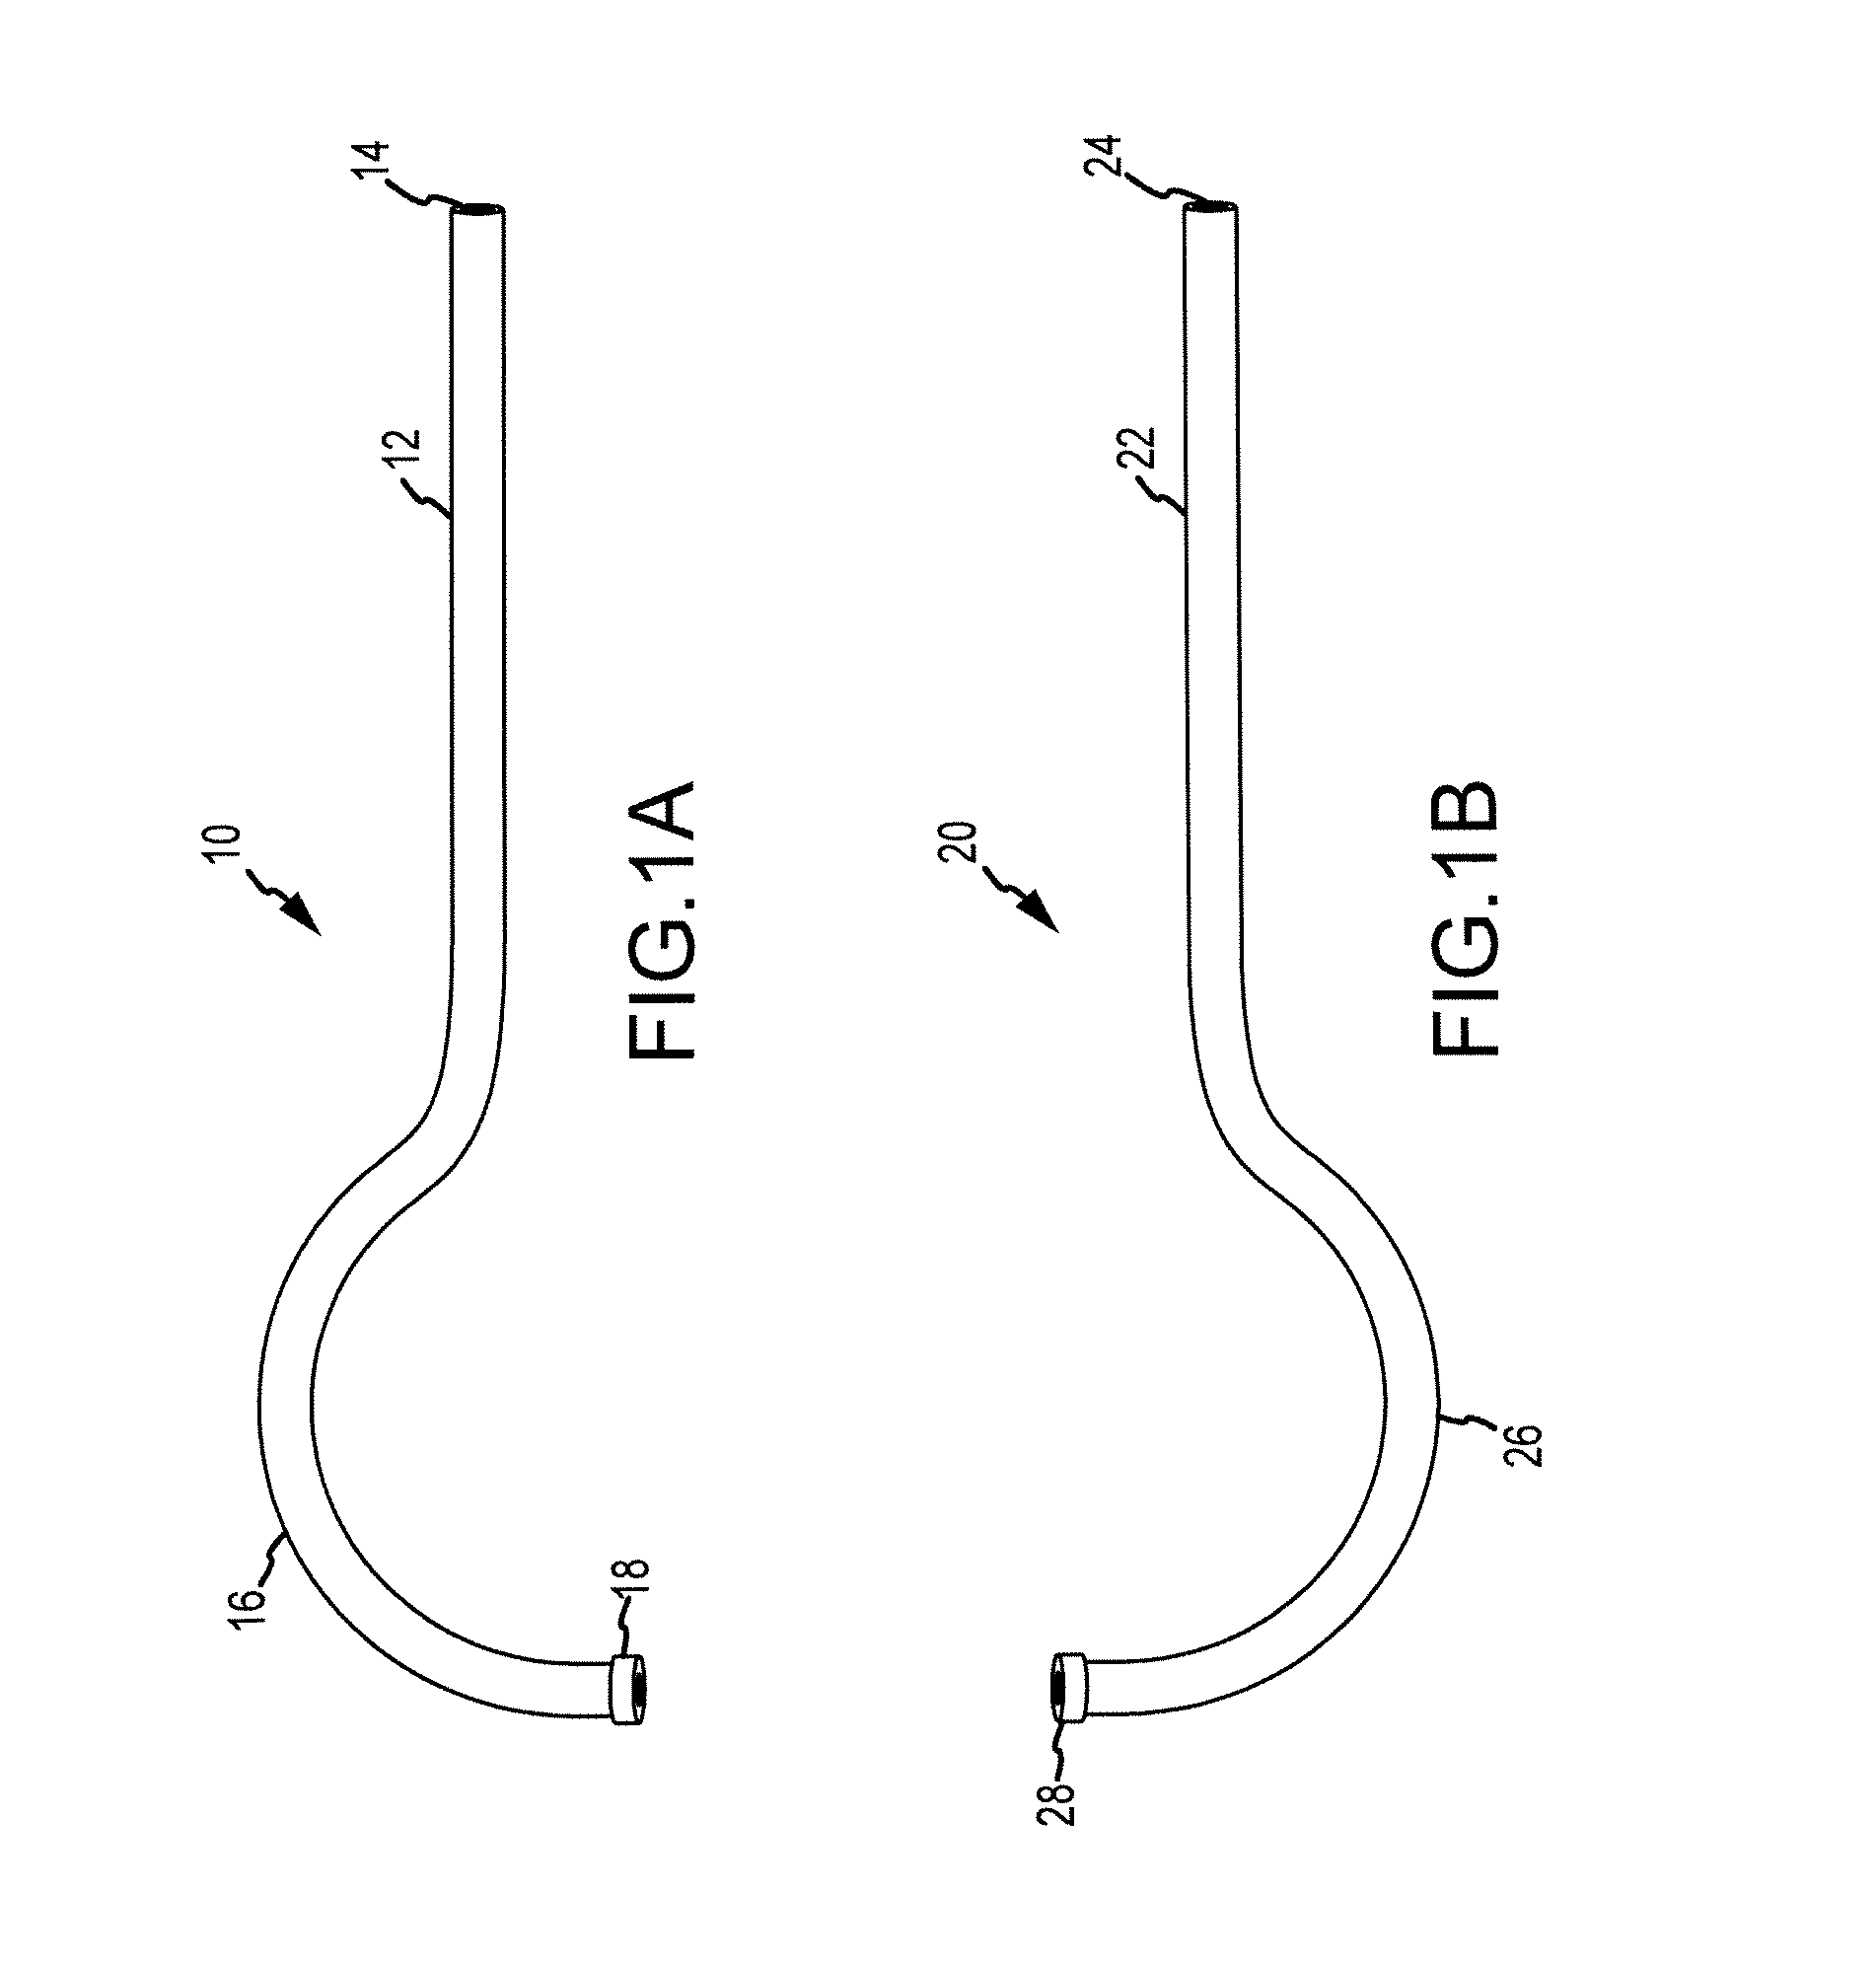 Cable clamping device and method of its use